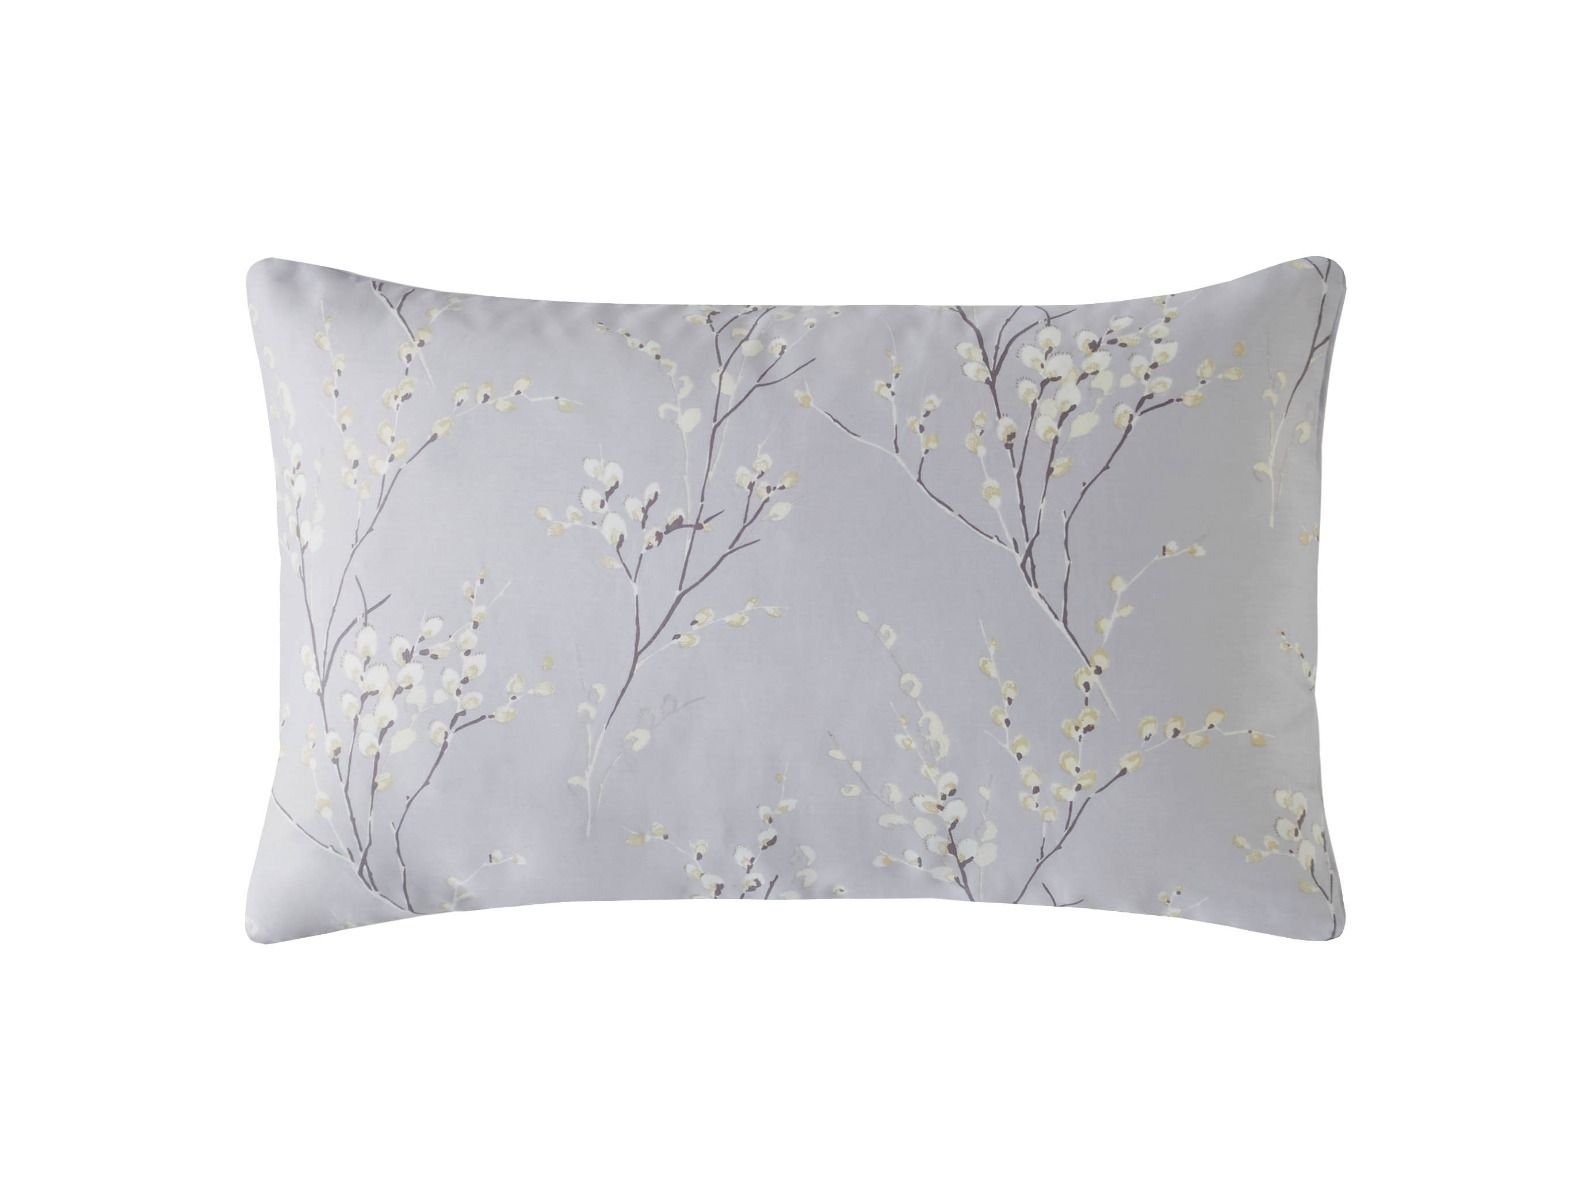 Laura Ashley Pussy Willow Lavender Duvet Cover and Pillowcase Set